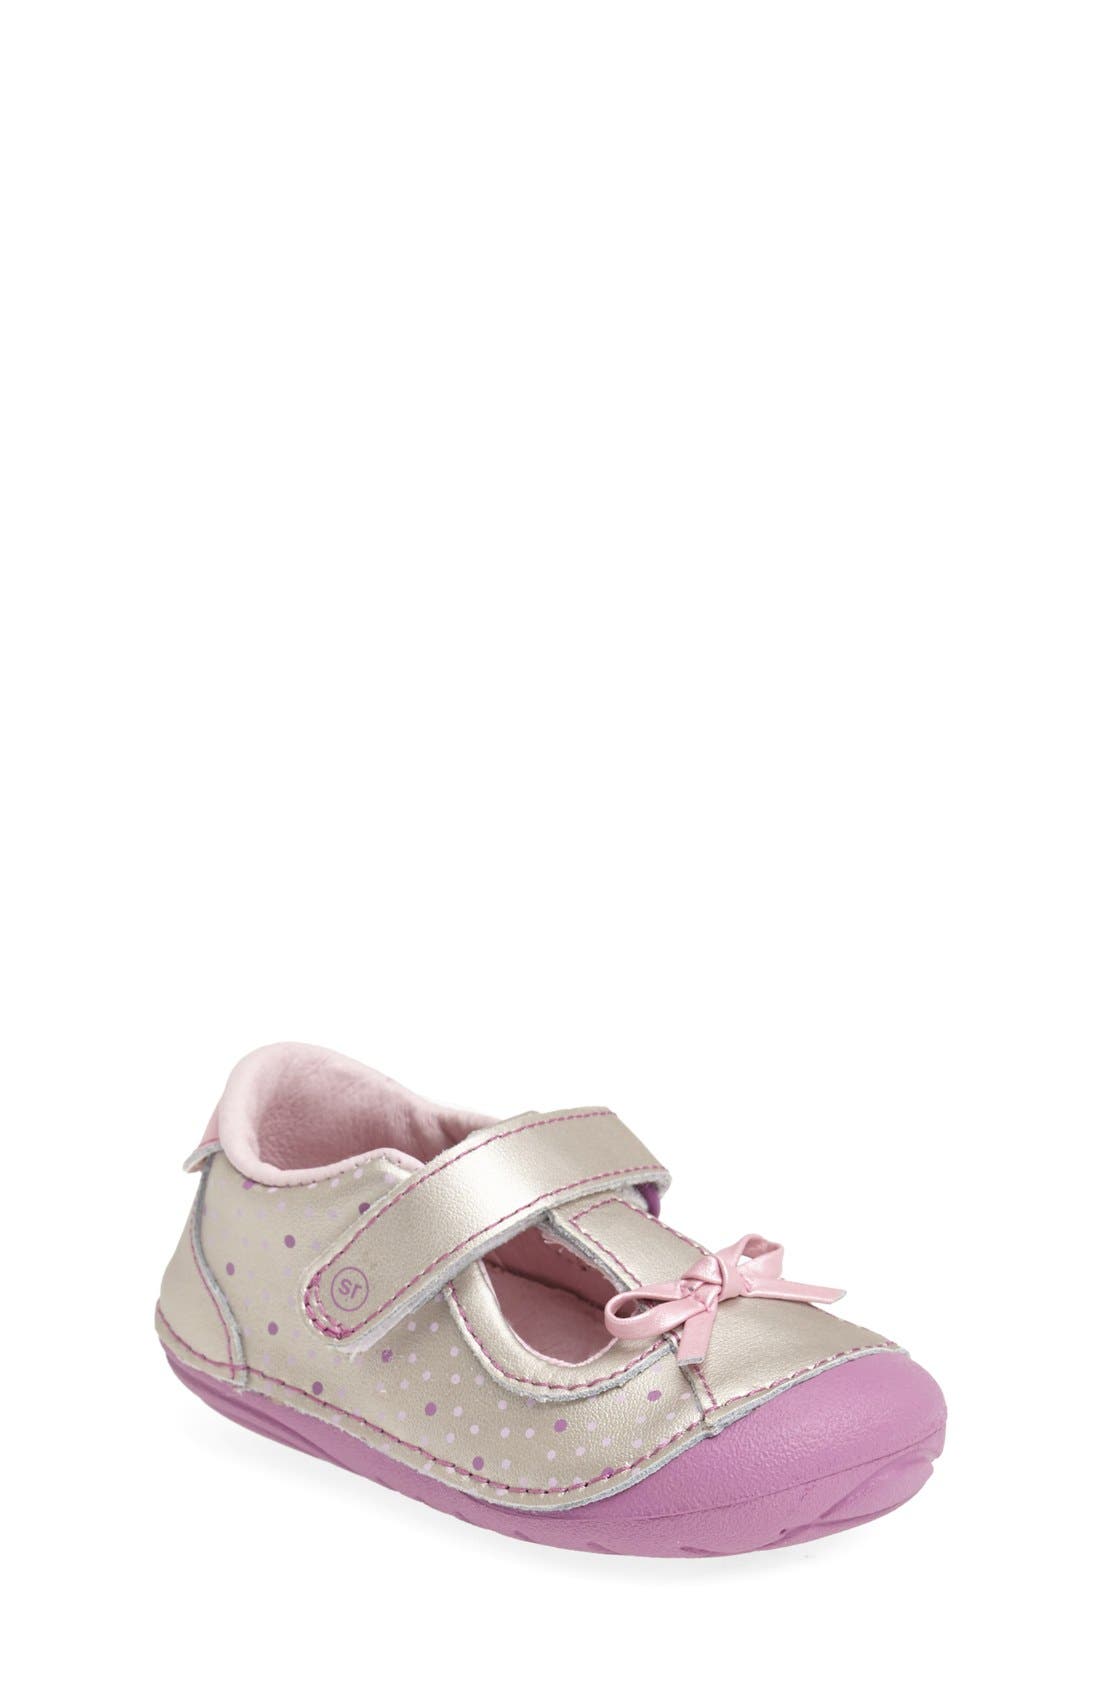 nordstrom stride rite shoes